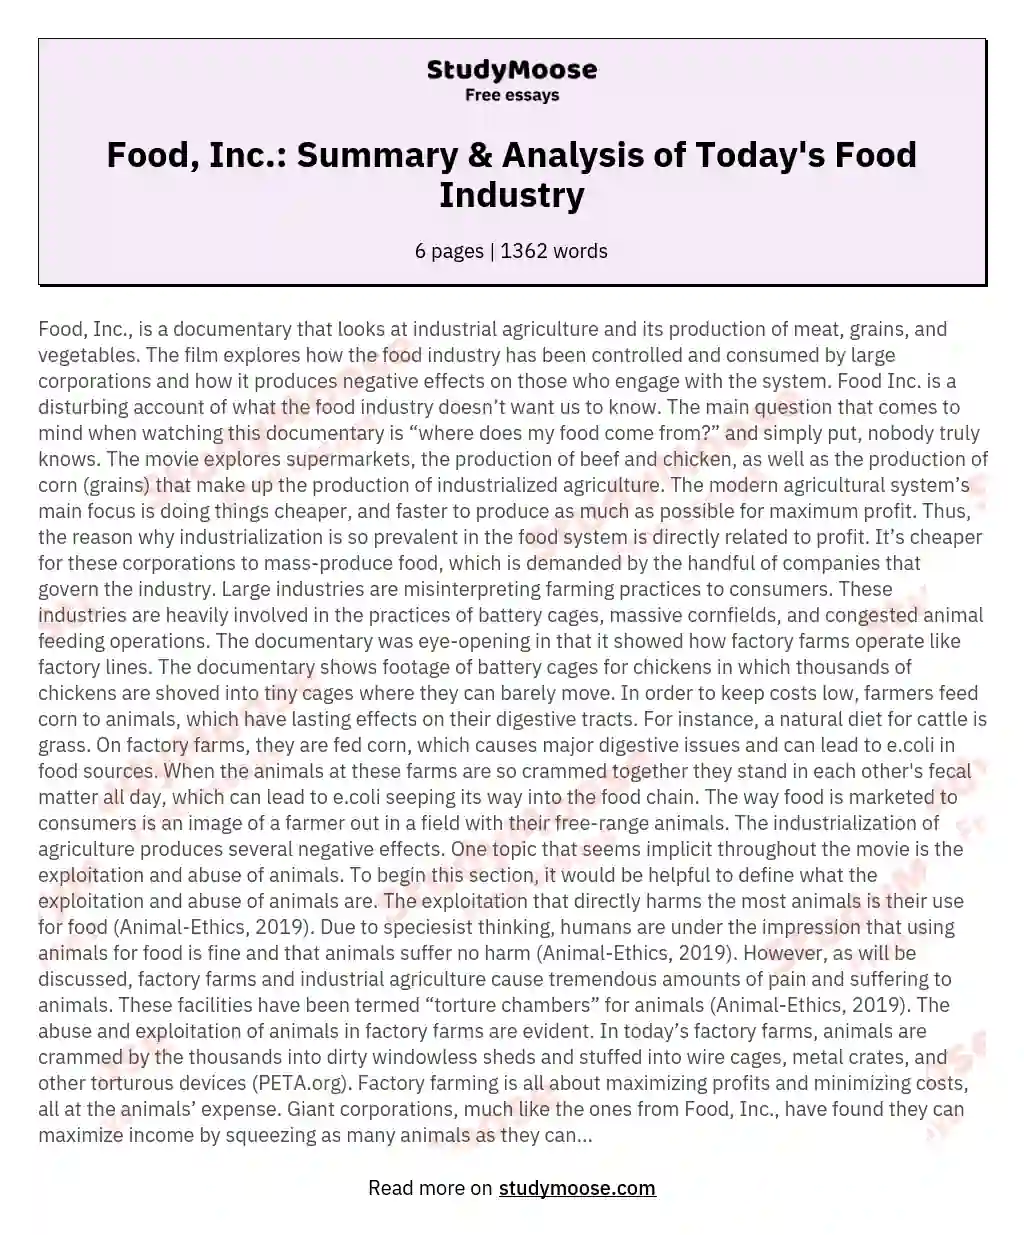 food industry essay questions